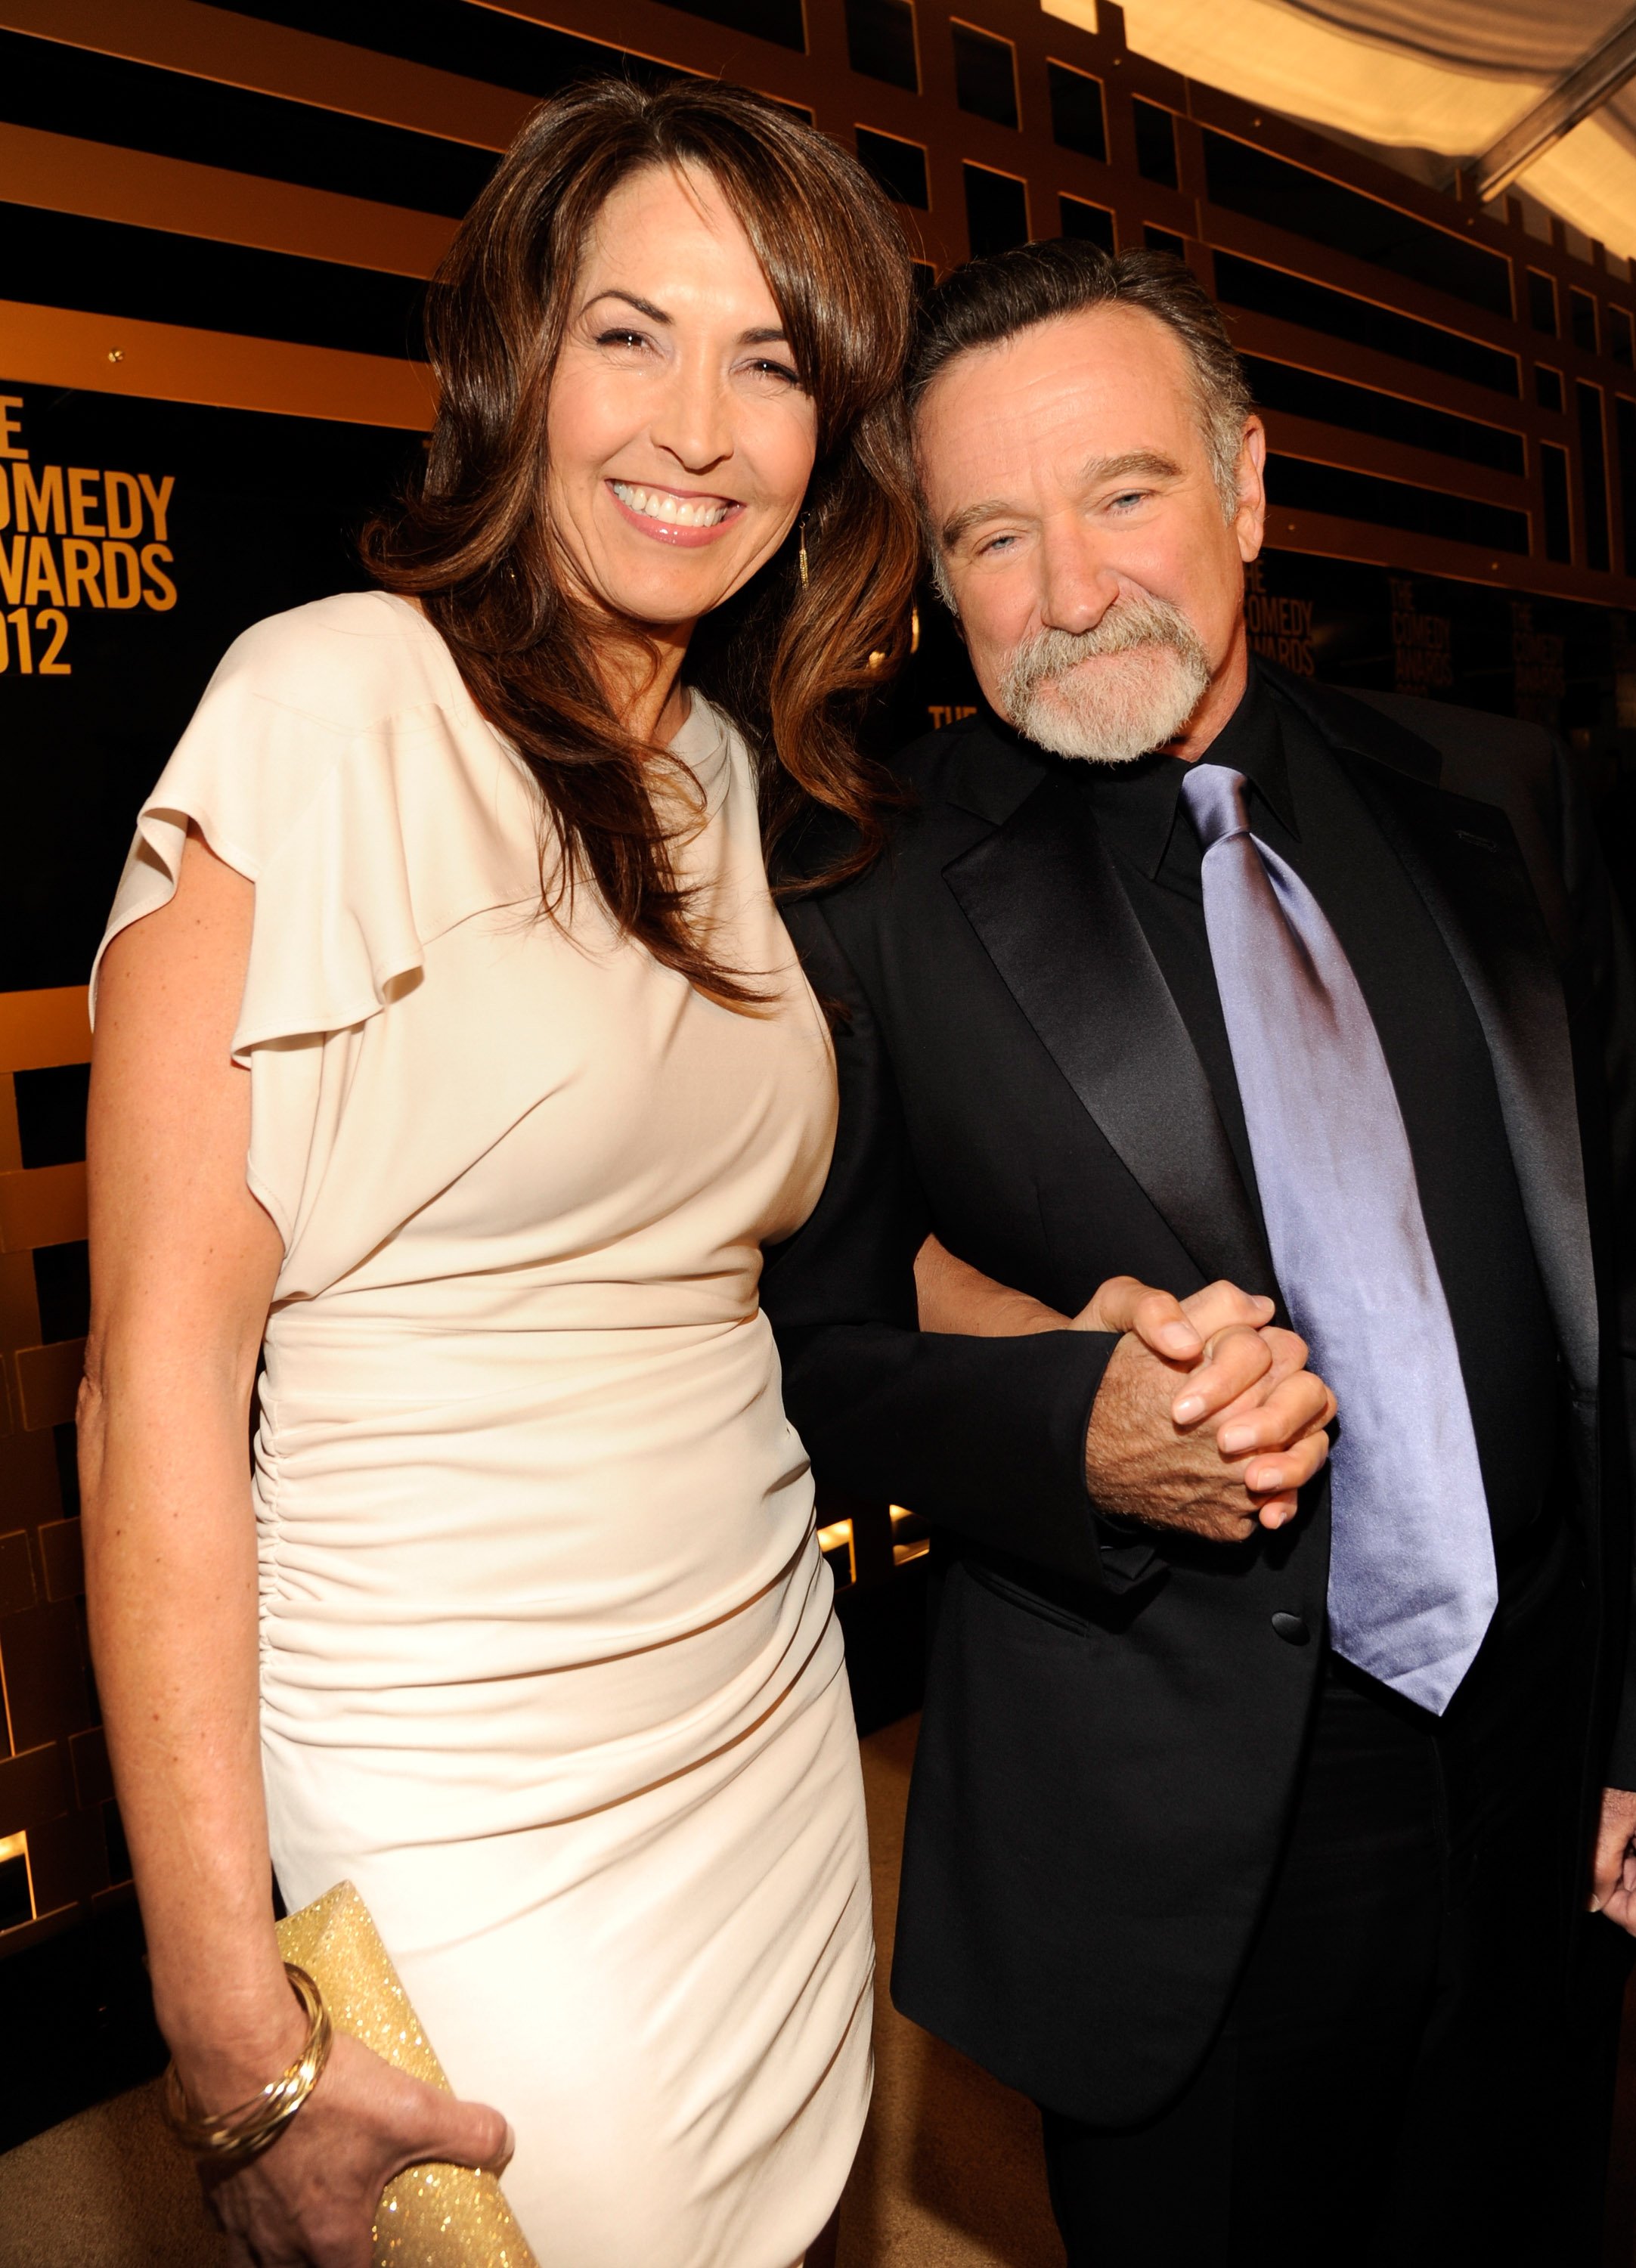 Susan Schneider and Robin Williams attend The Comedy Awards 2012 at Hammerstein Ballroom on April 28, 2012 in New York City | Source: Getty Images